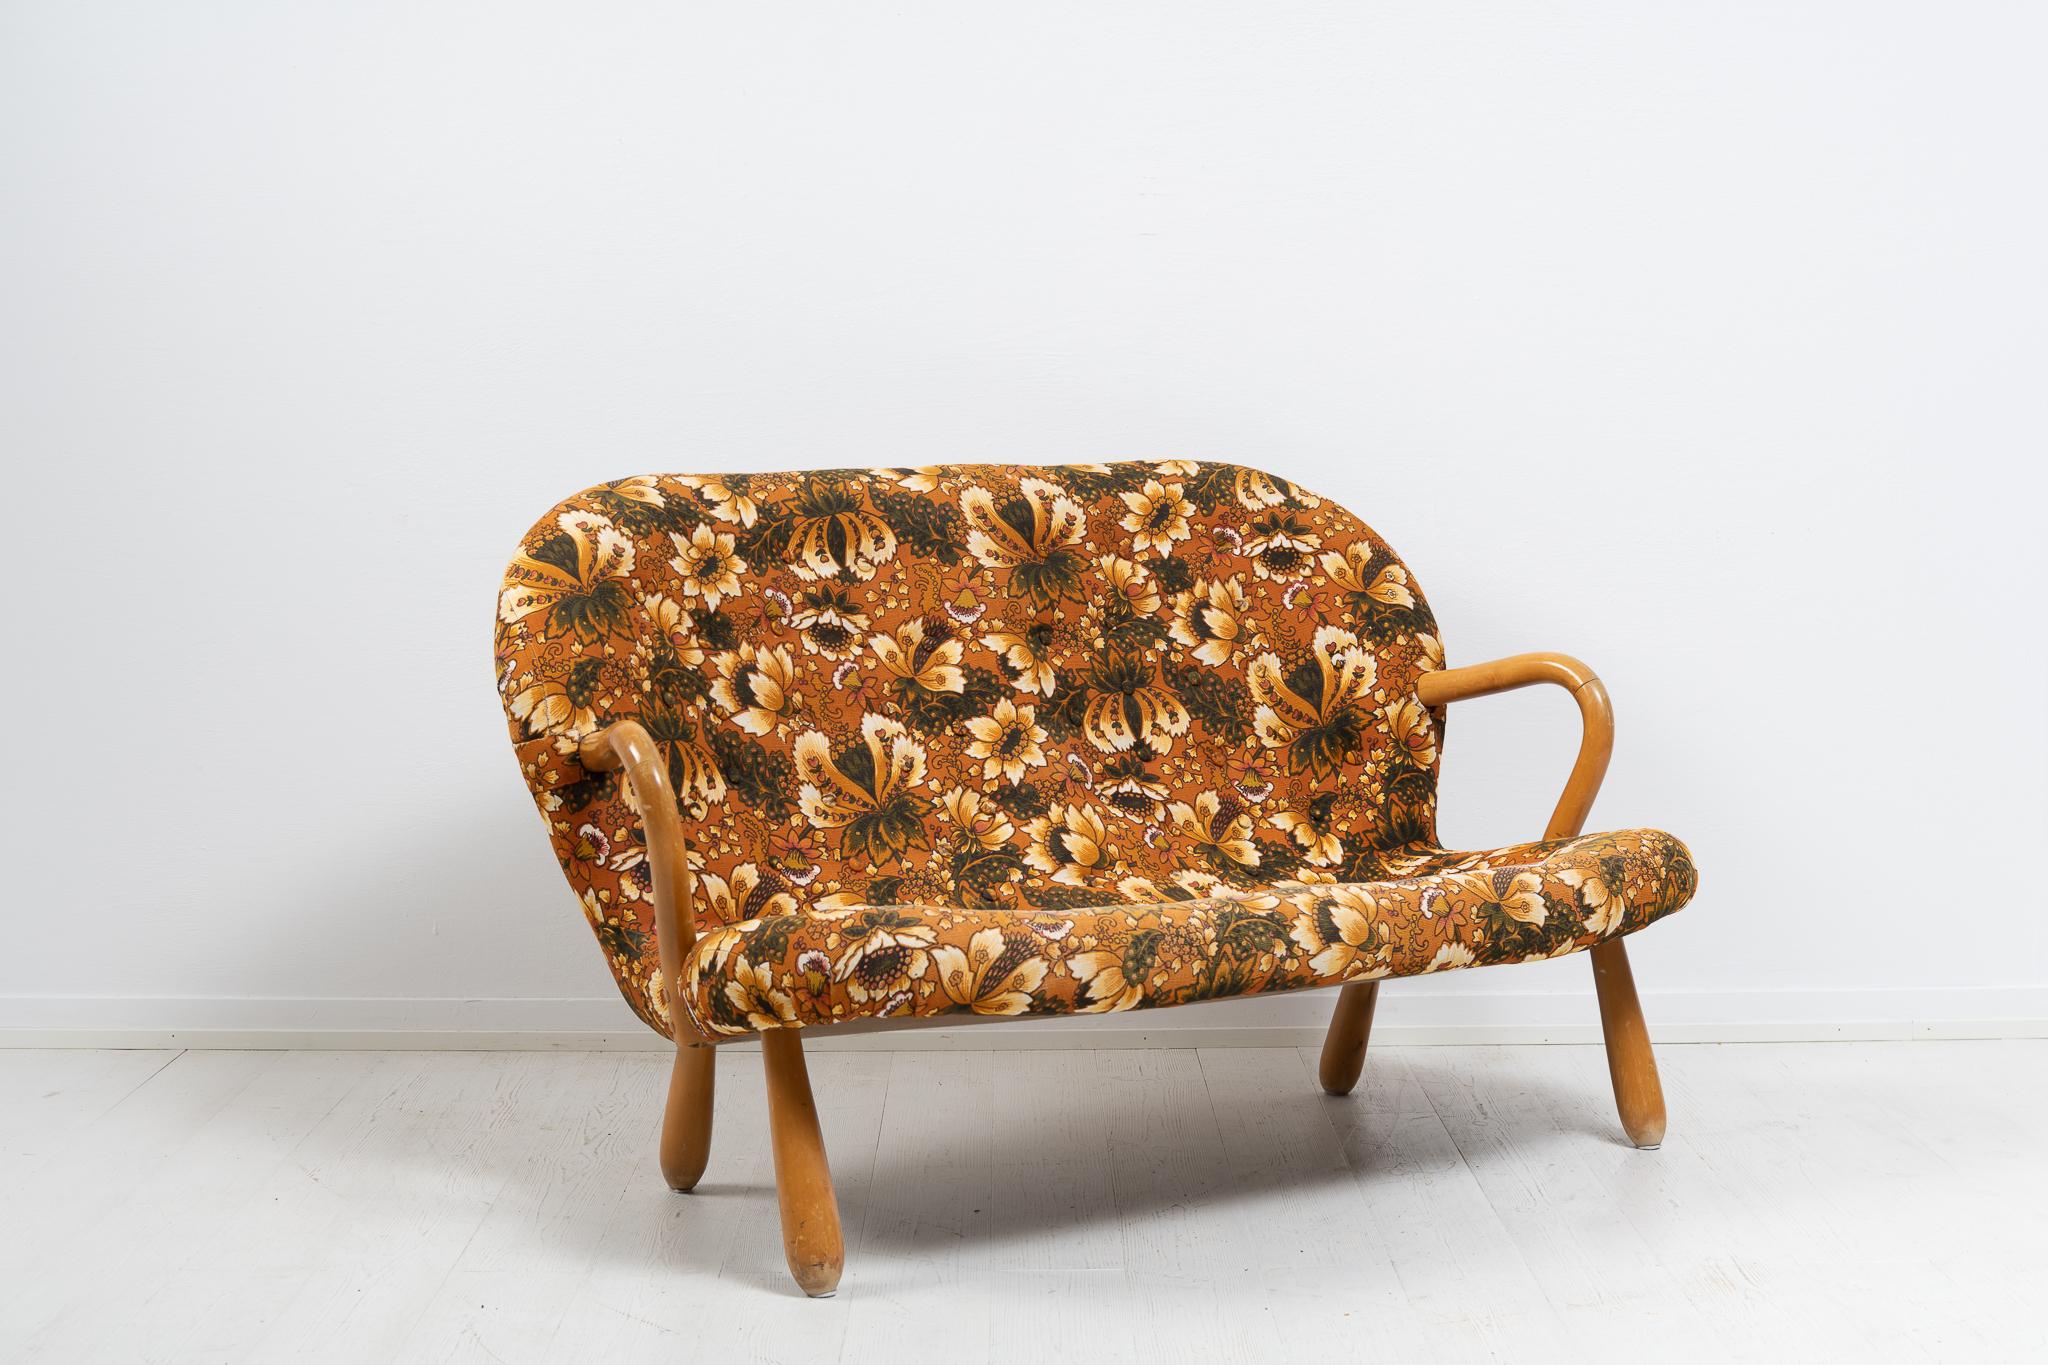 Muslinge sofa or Clam sofa designed in 1944 likely by Philip Arctander. The sofa is manufactured by Sune Johanssons Möbelfabrik in Nässjö, Sweden. The sofa is in good vintage condition consistent with age and use with some smaller signs of wear.